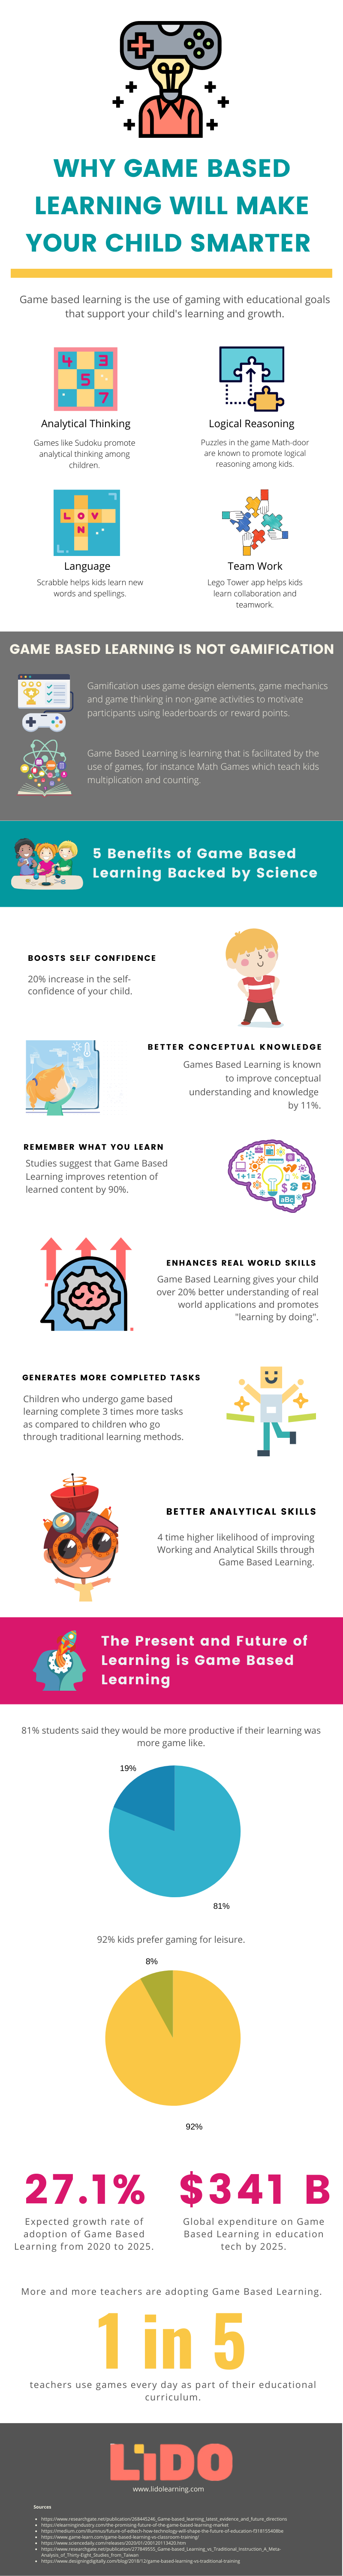 why-game-based-learning-will-make-your-child-smarter (1).png